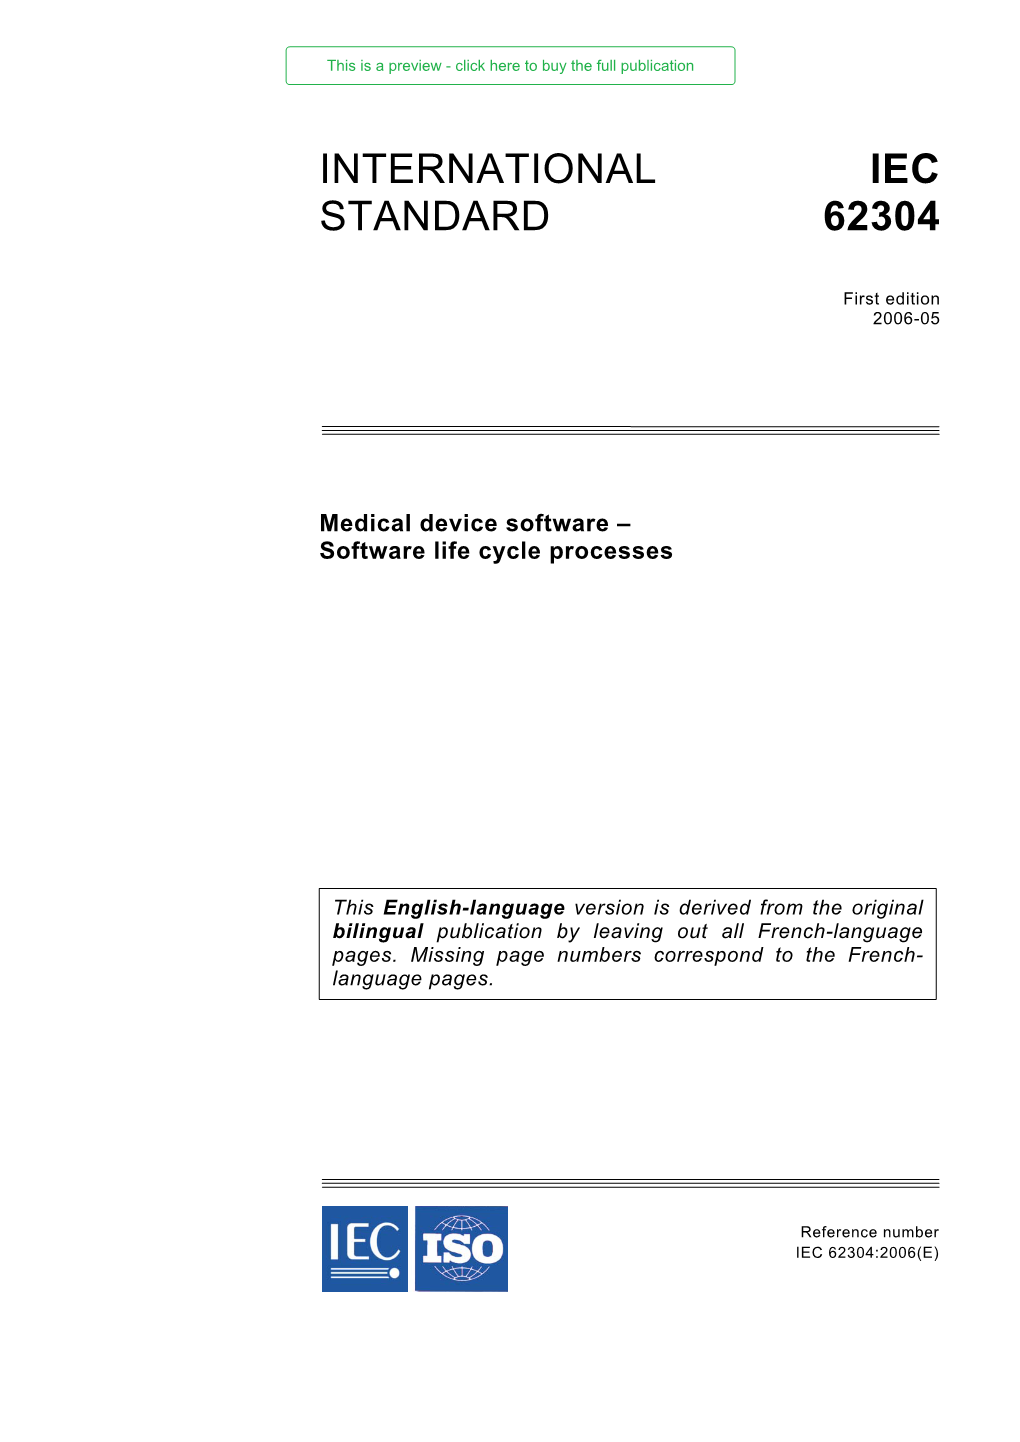 IEC 62304:2006(E) This Is a Preview - Click Here to Buy the Full Publication